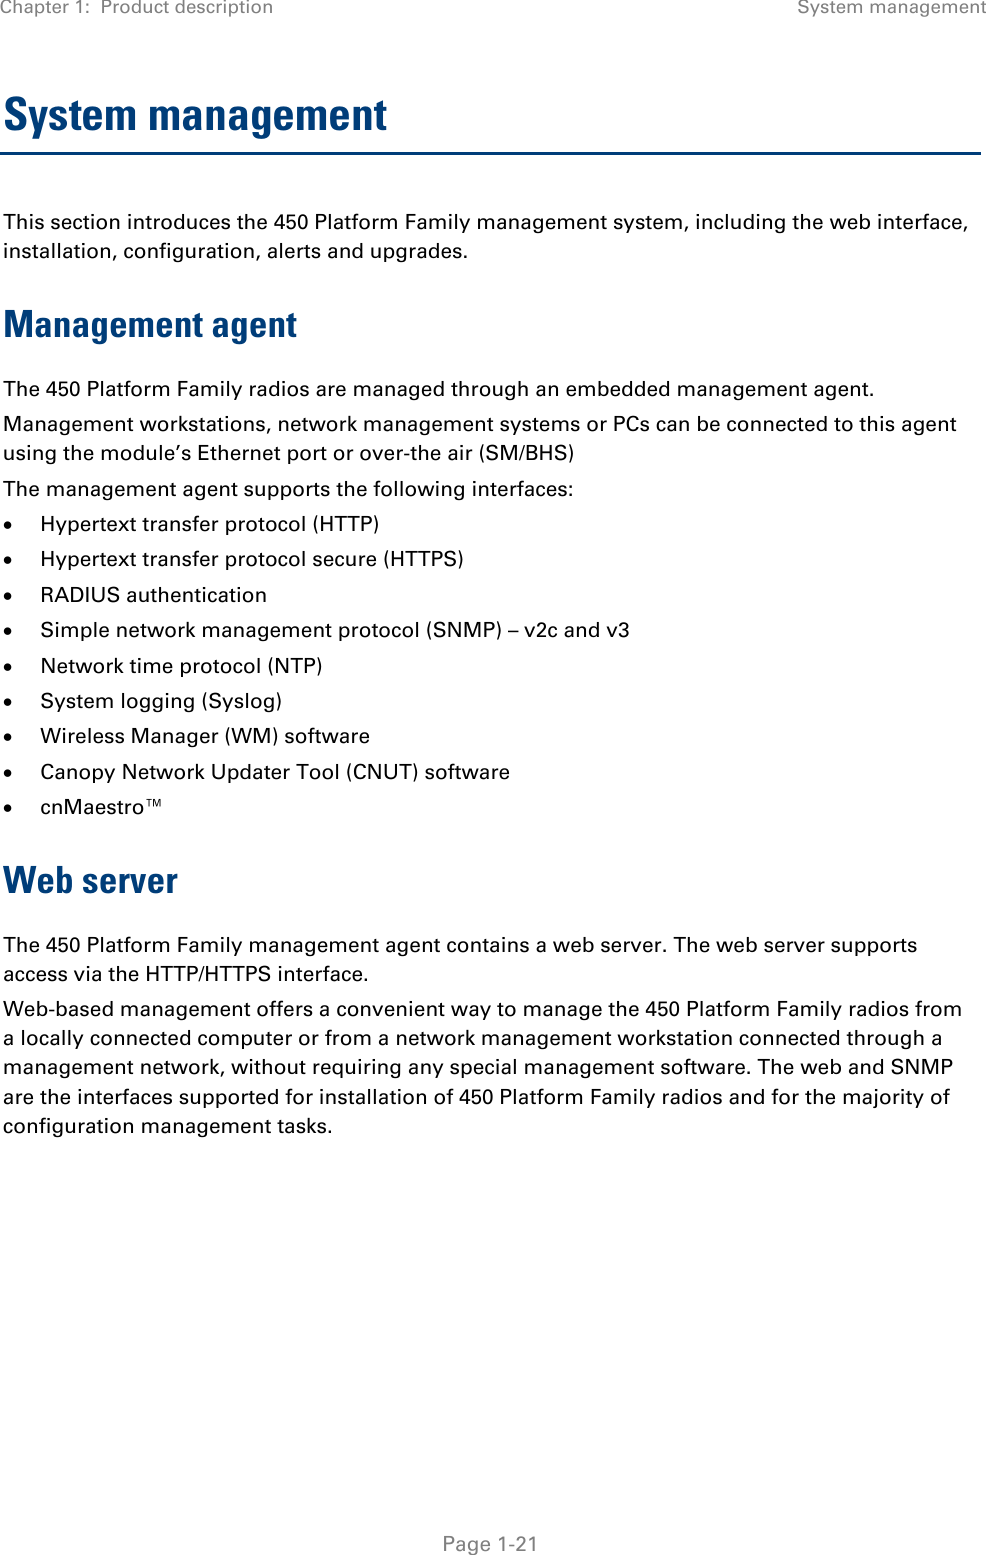 Chapter 1:  Product description System management   Page 1-21 System management This section introduces the 450 Platform Family management system, including the web interface, installation, configuration, alerts and upgrades. Management agent The 450 Platform Family radios are managed through an embedded management agent.  Management workstations, network management systems or PCs can be connected to this agent using the module’s Ethernet port or over-the air (SM/BHS)  The management agent supports the following interfaces:  • Hypertext transfer protocol (HTTP)  • Hypertext transfer protocol secure (HTTPS) • RADIUS authentication  • Simple network management protocol (SNMP) – v2c and v3 • Network time protocol (NTP)  • System logging (Syslog)  • Wireless Manager (WM) software  • Canopy Network Updater Tool (CNUT) software  • cnMaestro™ Web server The 450 Platform Family management agent contains a web server. The web server supports access via the HTTP/HTTPS interface. Web-based management offers a convenient way to manage the 450 Platform Family radios from a locally connected computer or from a network management workstation connected through a management network, without requiring any special management software. The web and SNMP are the interfaces supported for installation of 450 Platform Family radios and for the majority of configuration management tasks.    